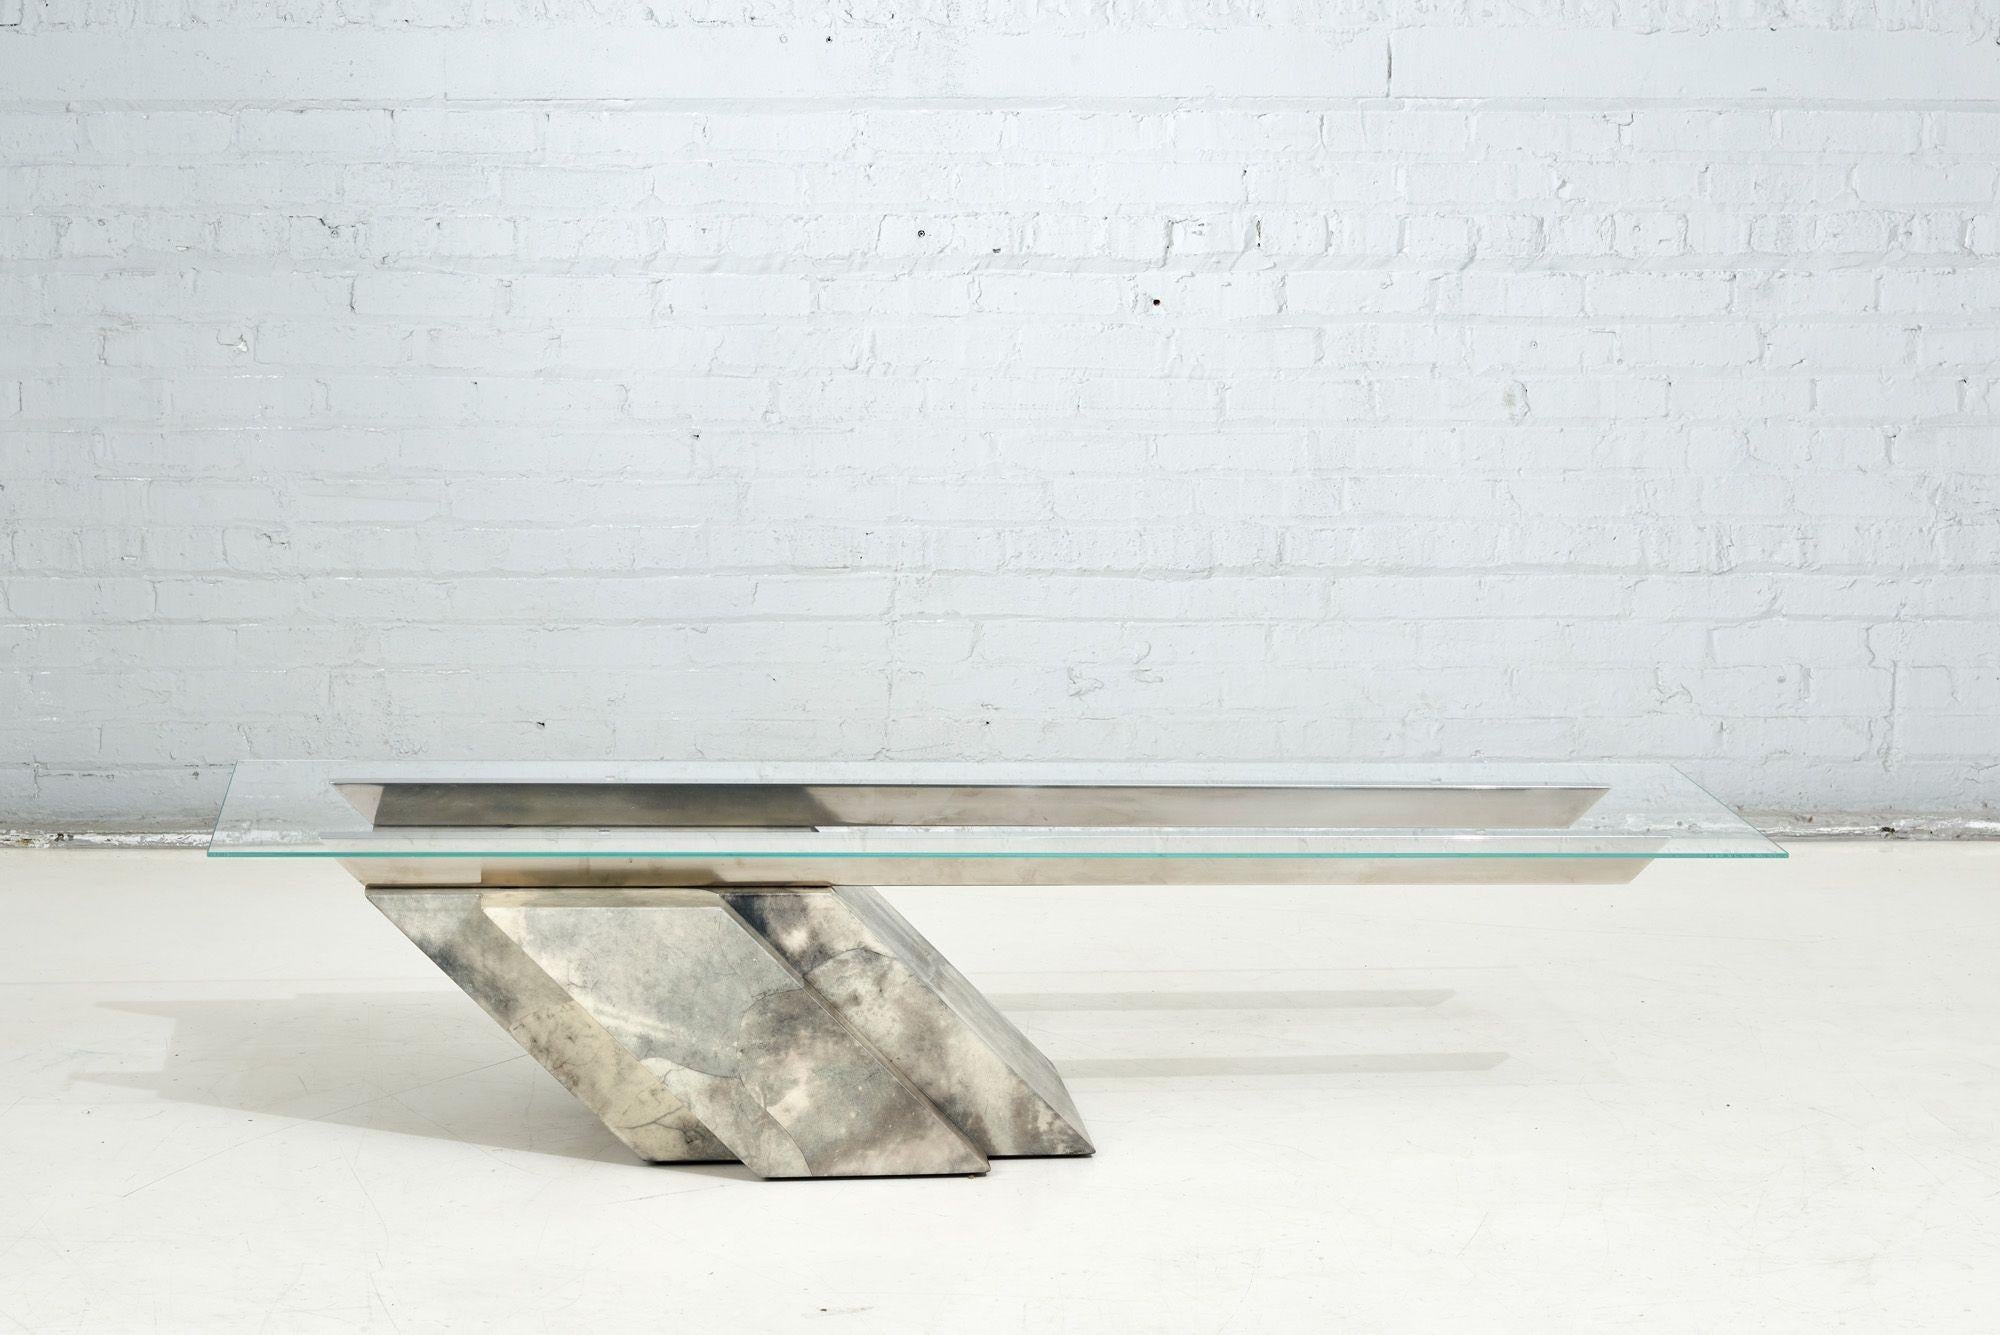 Goatskin cantilevered Stainless Steel and Glass Coffee Table, 1970. Original

